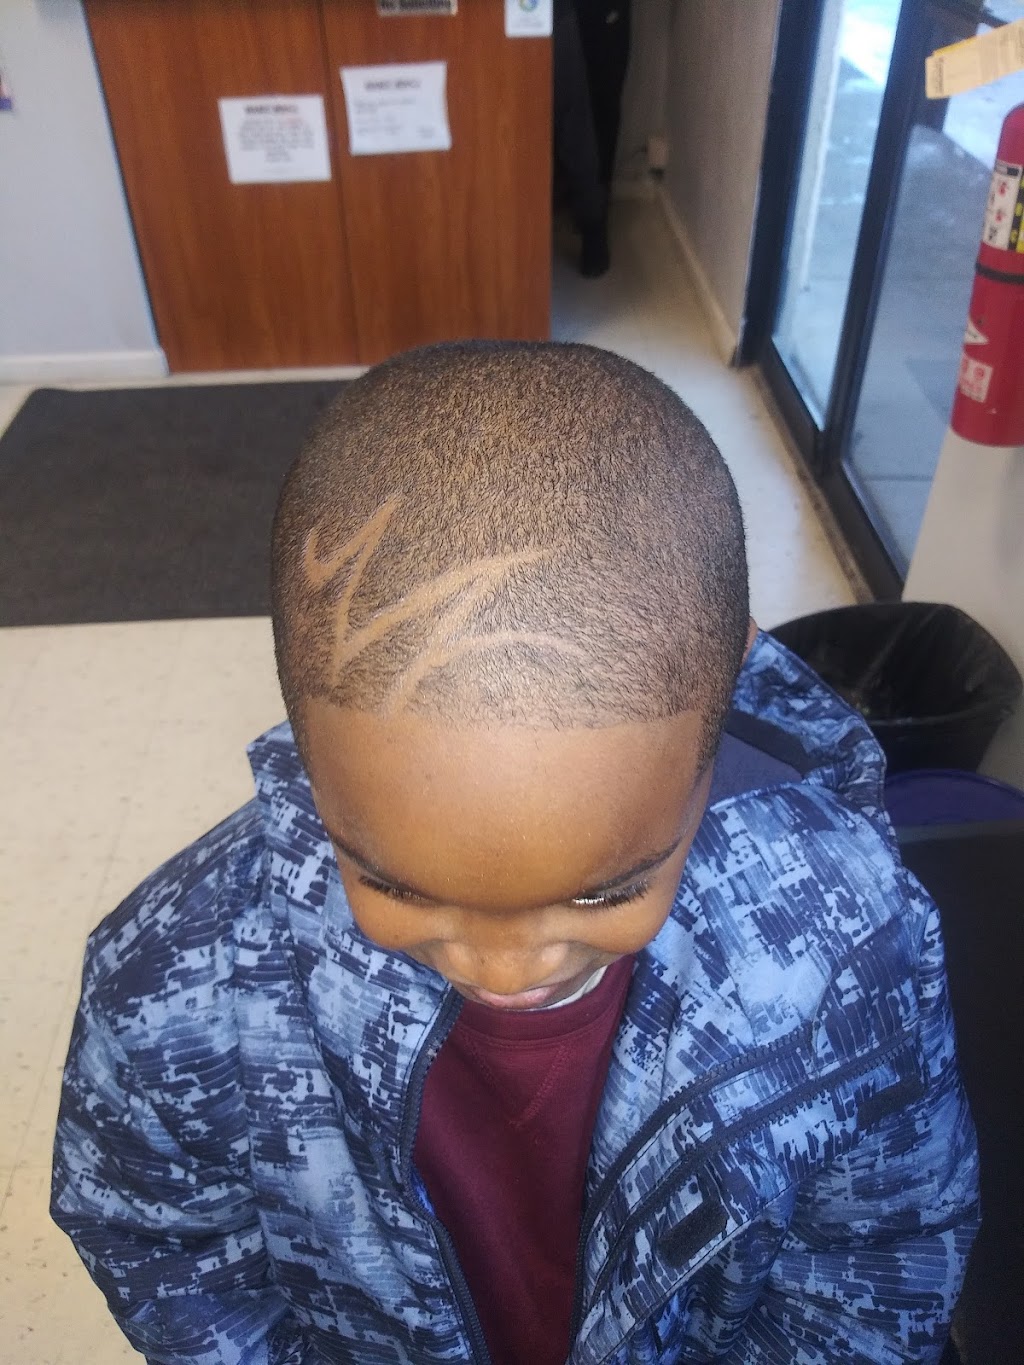 Beyond Expectations Barber College | 2246 Glenwood Ave, Youngstown, OH 44511, USA | Phone: (234) 228-8905